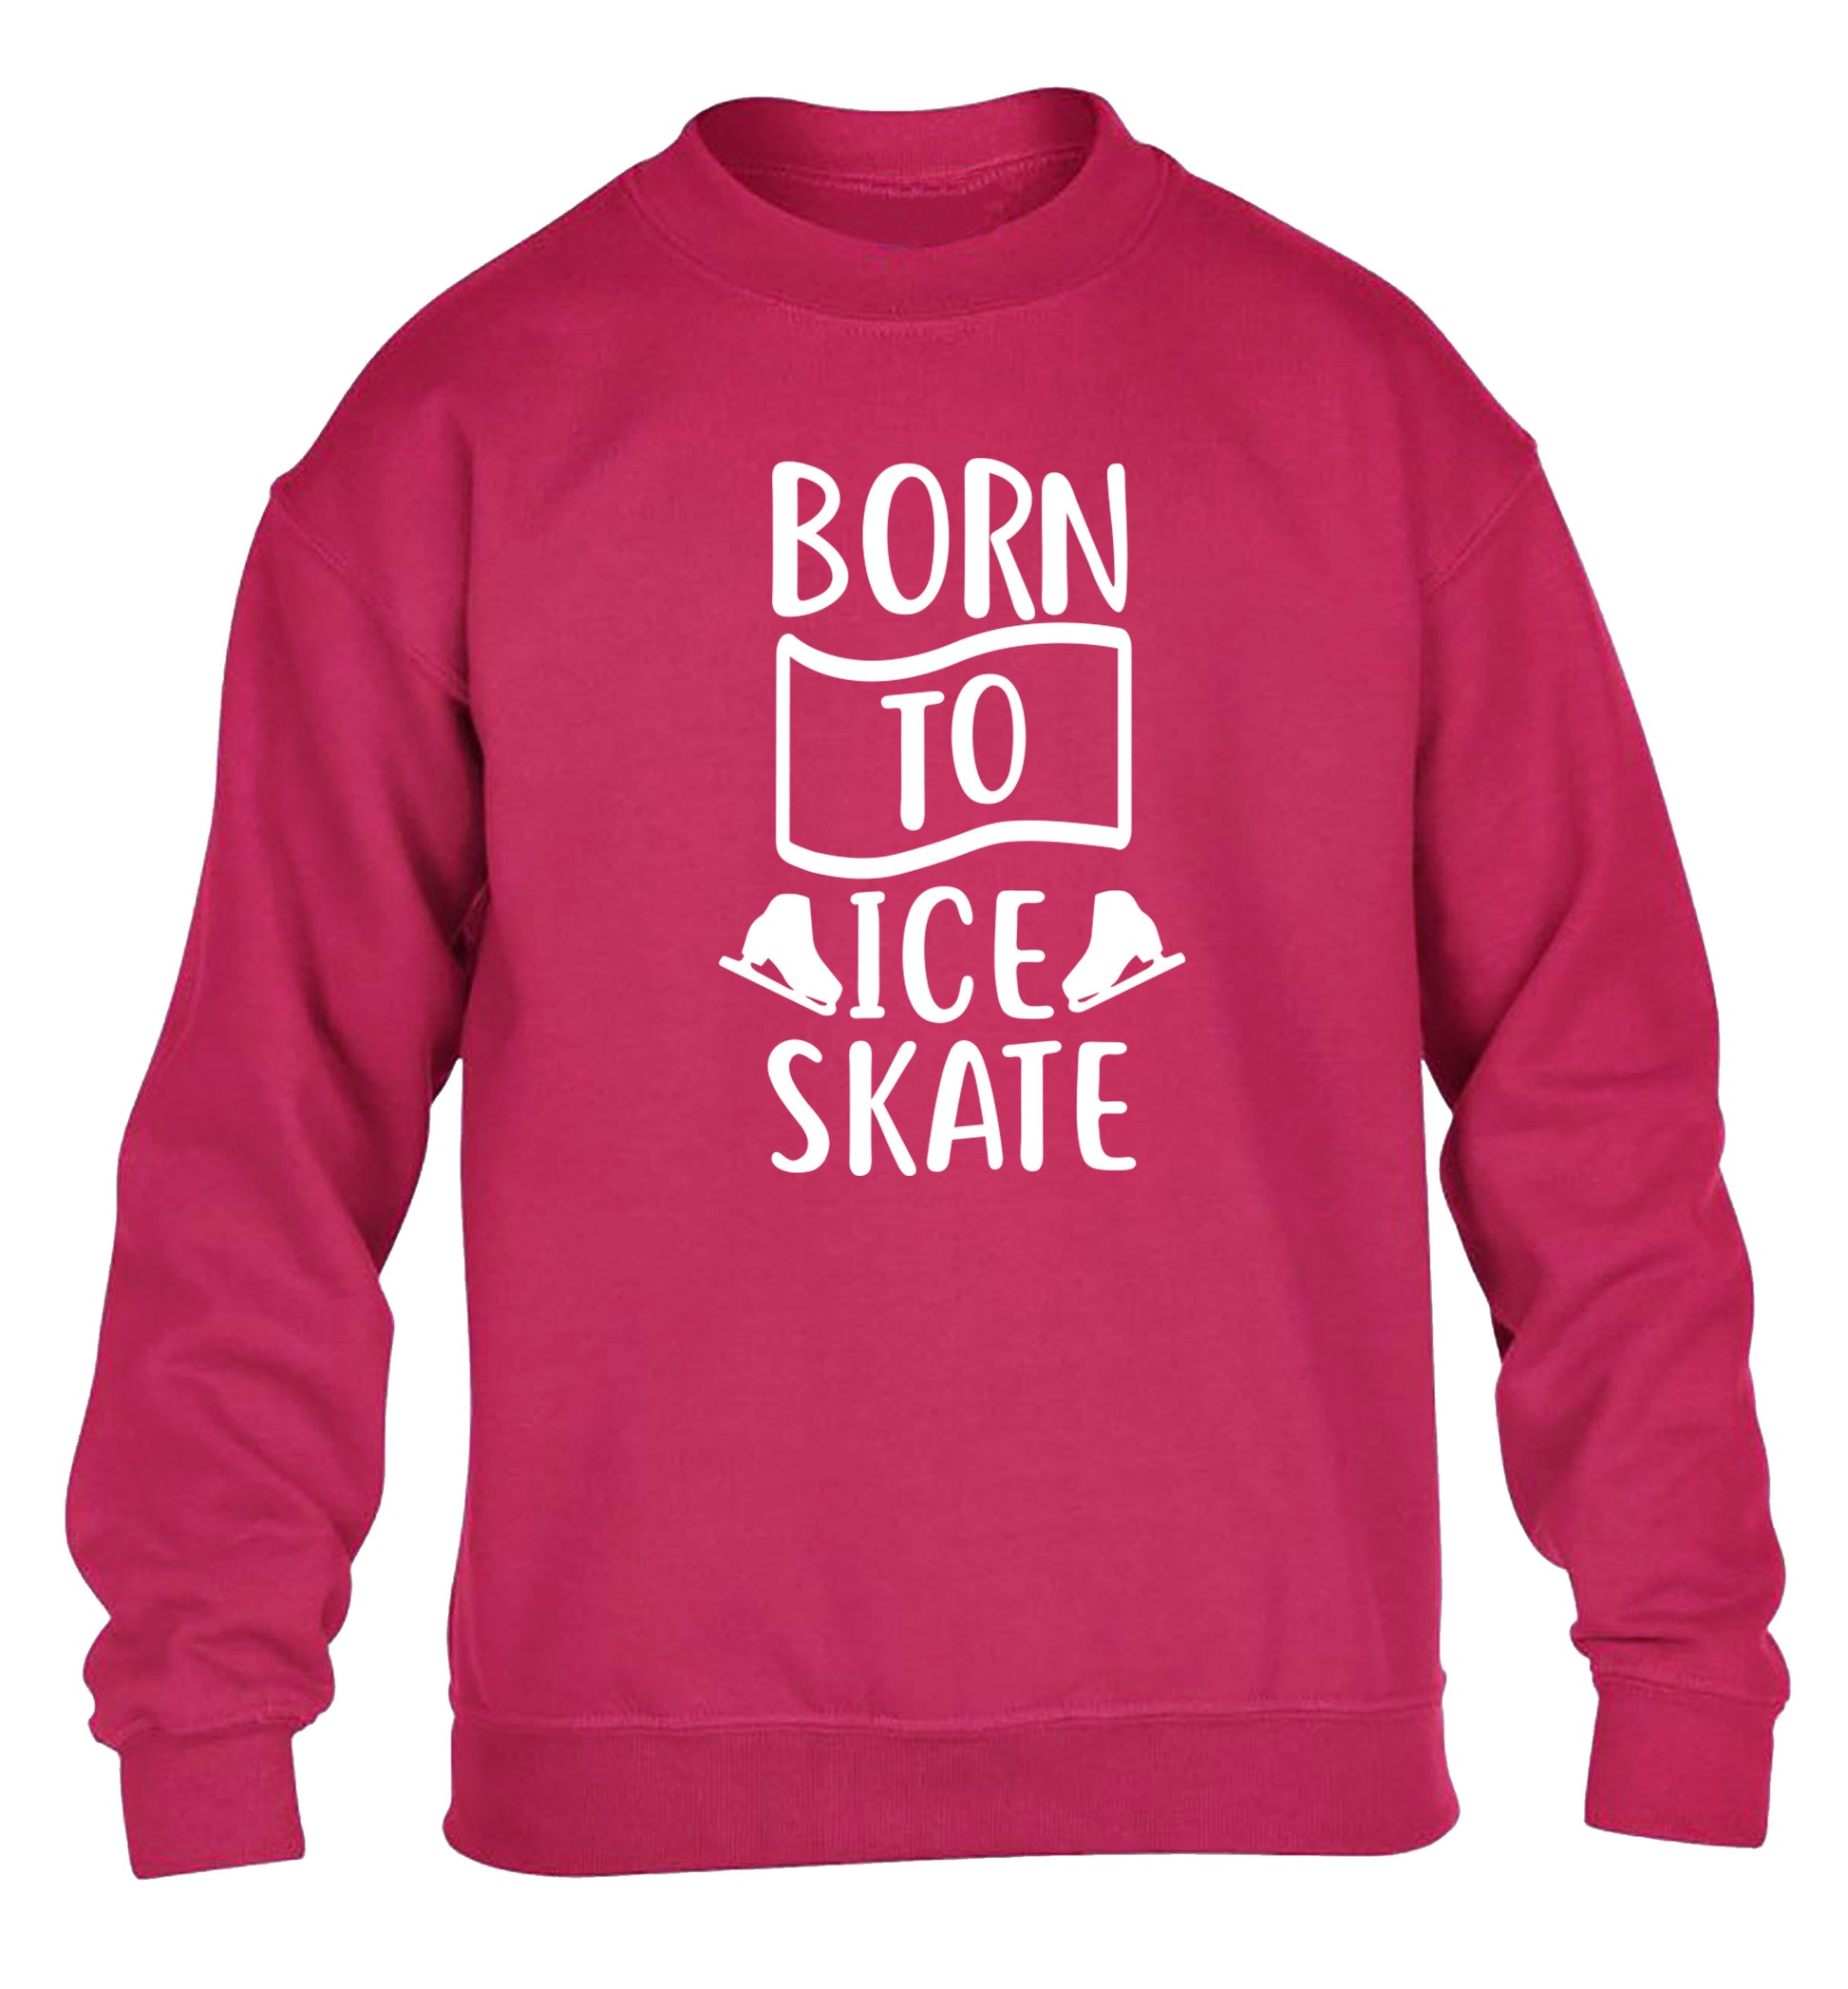 I ice skate because I like it not because I'm good at it children's pink sweater 12-14 Years